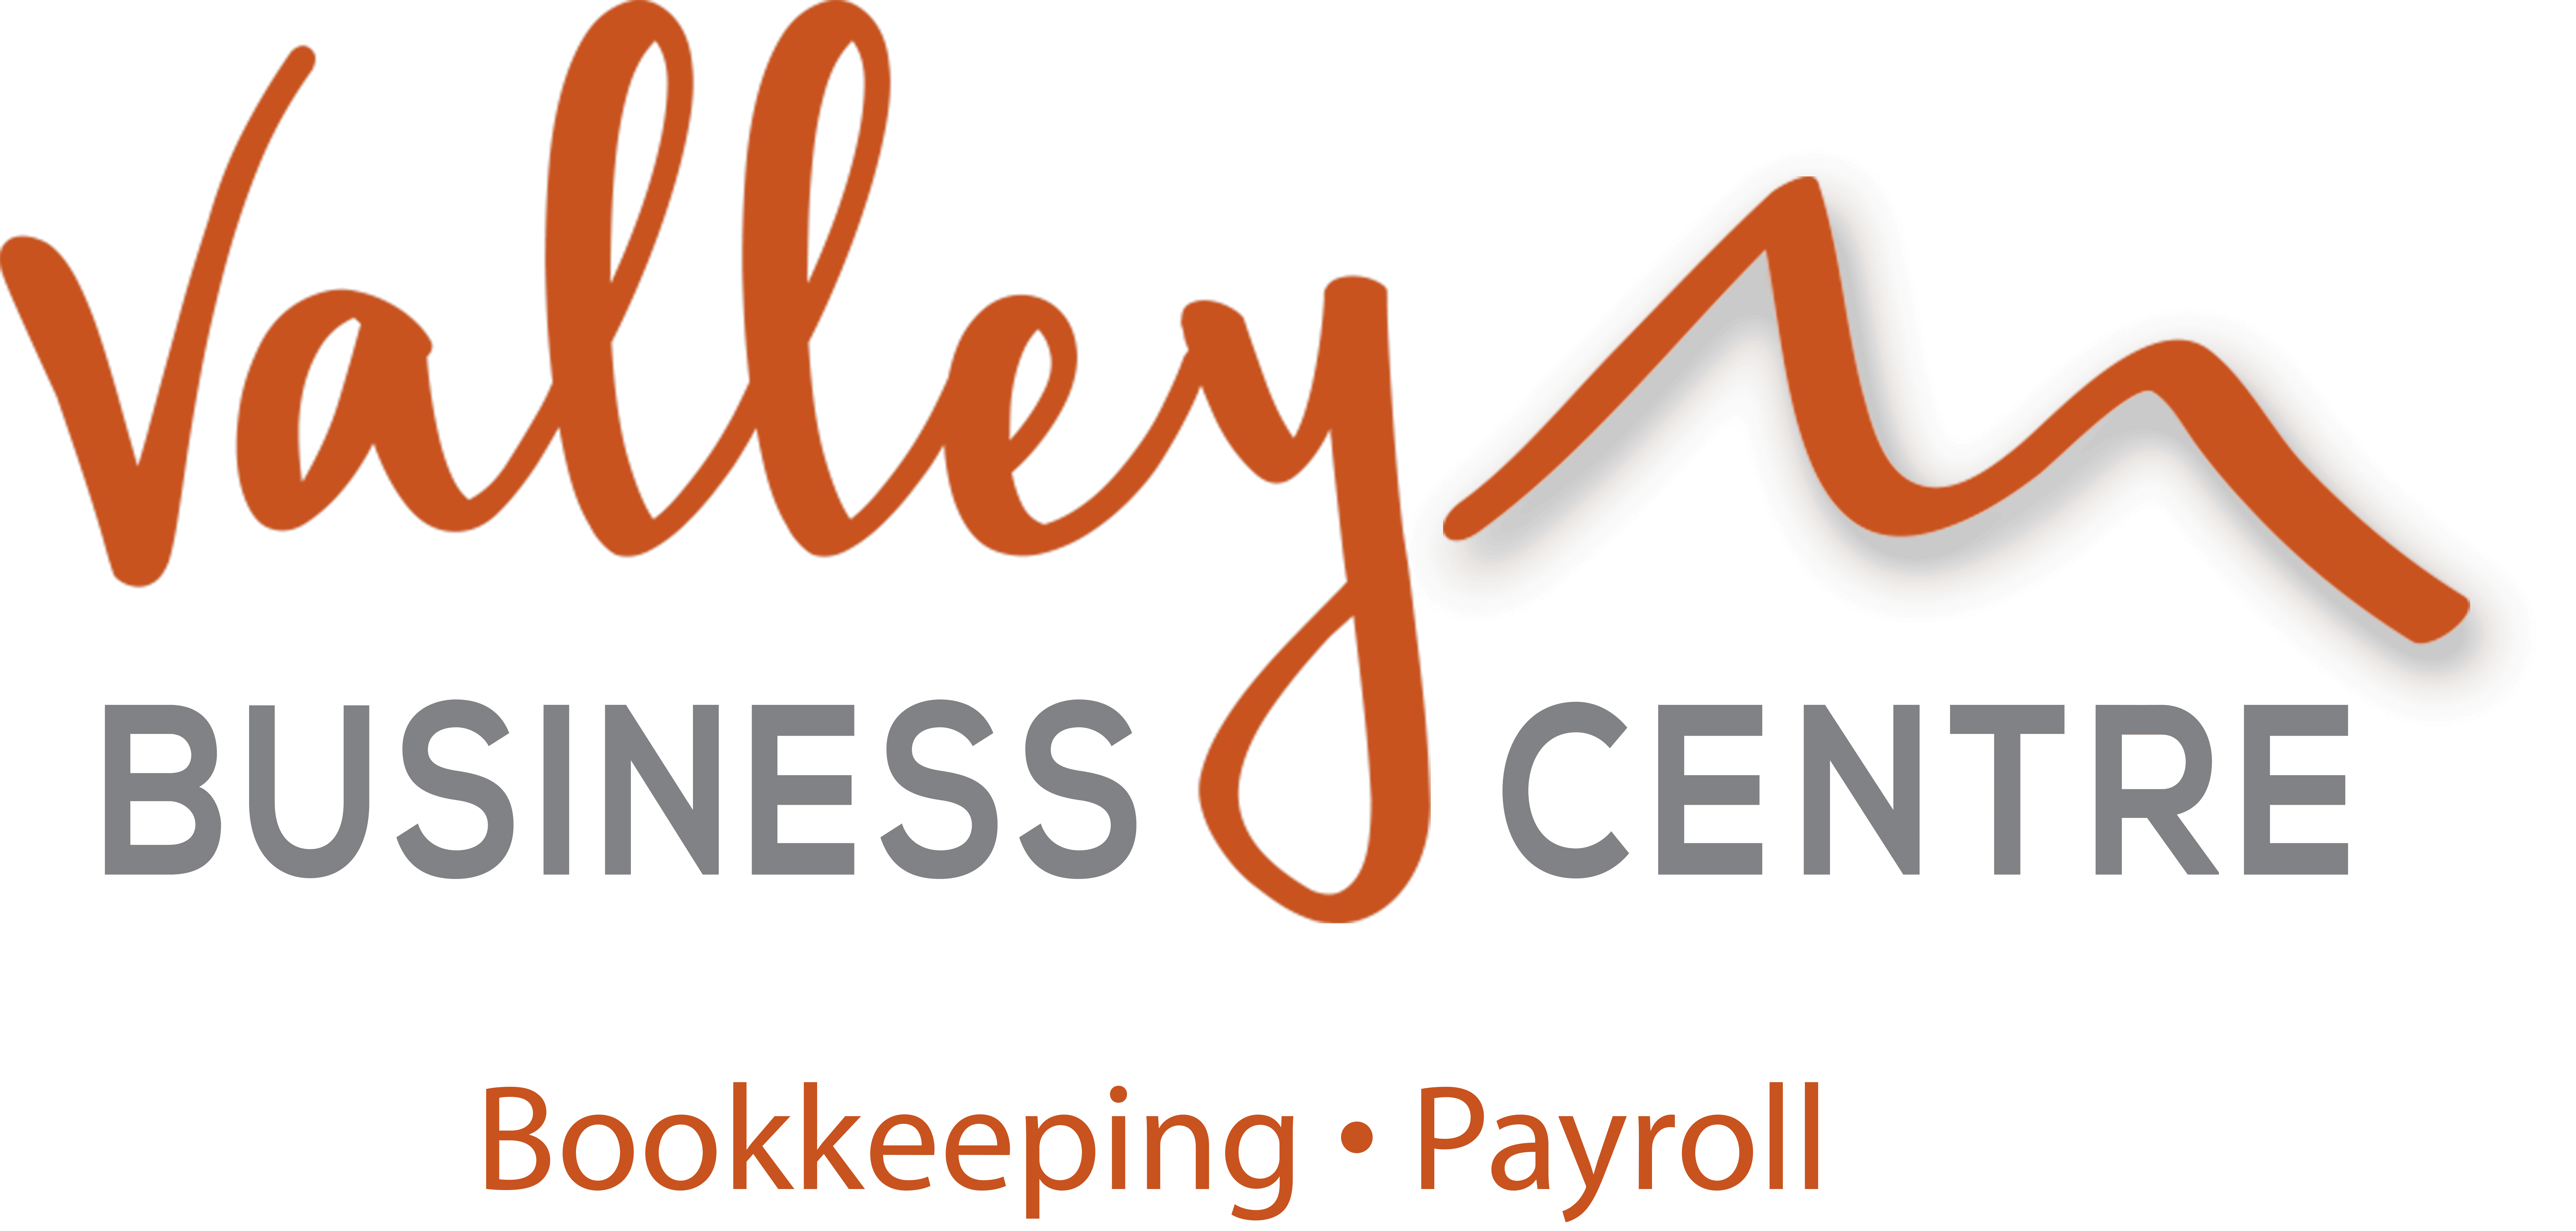 Featured Image for Valley Business Centre - Bookkeeping & Payroll